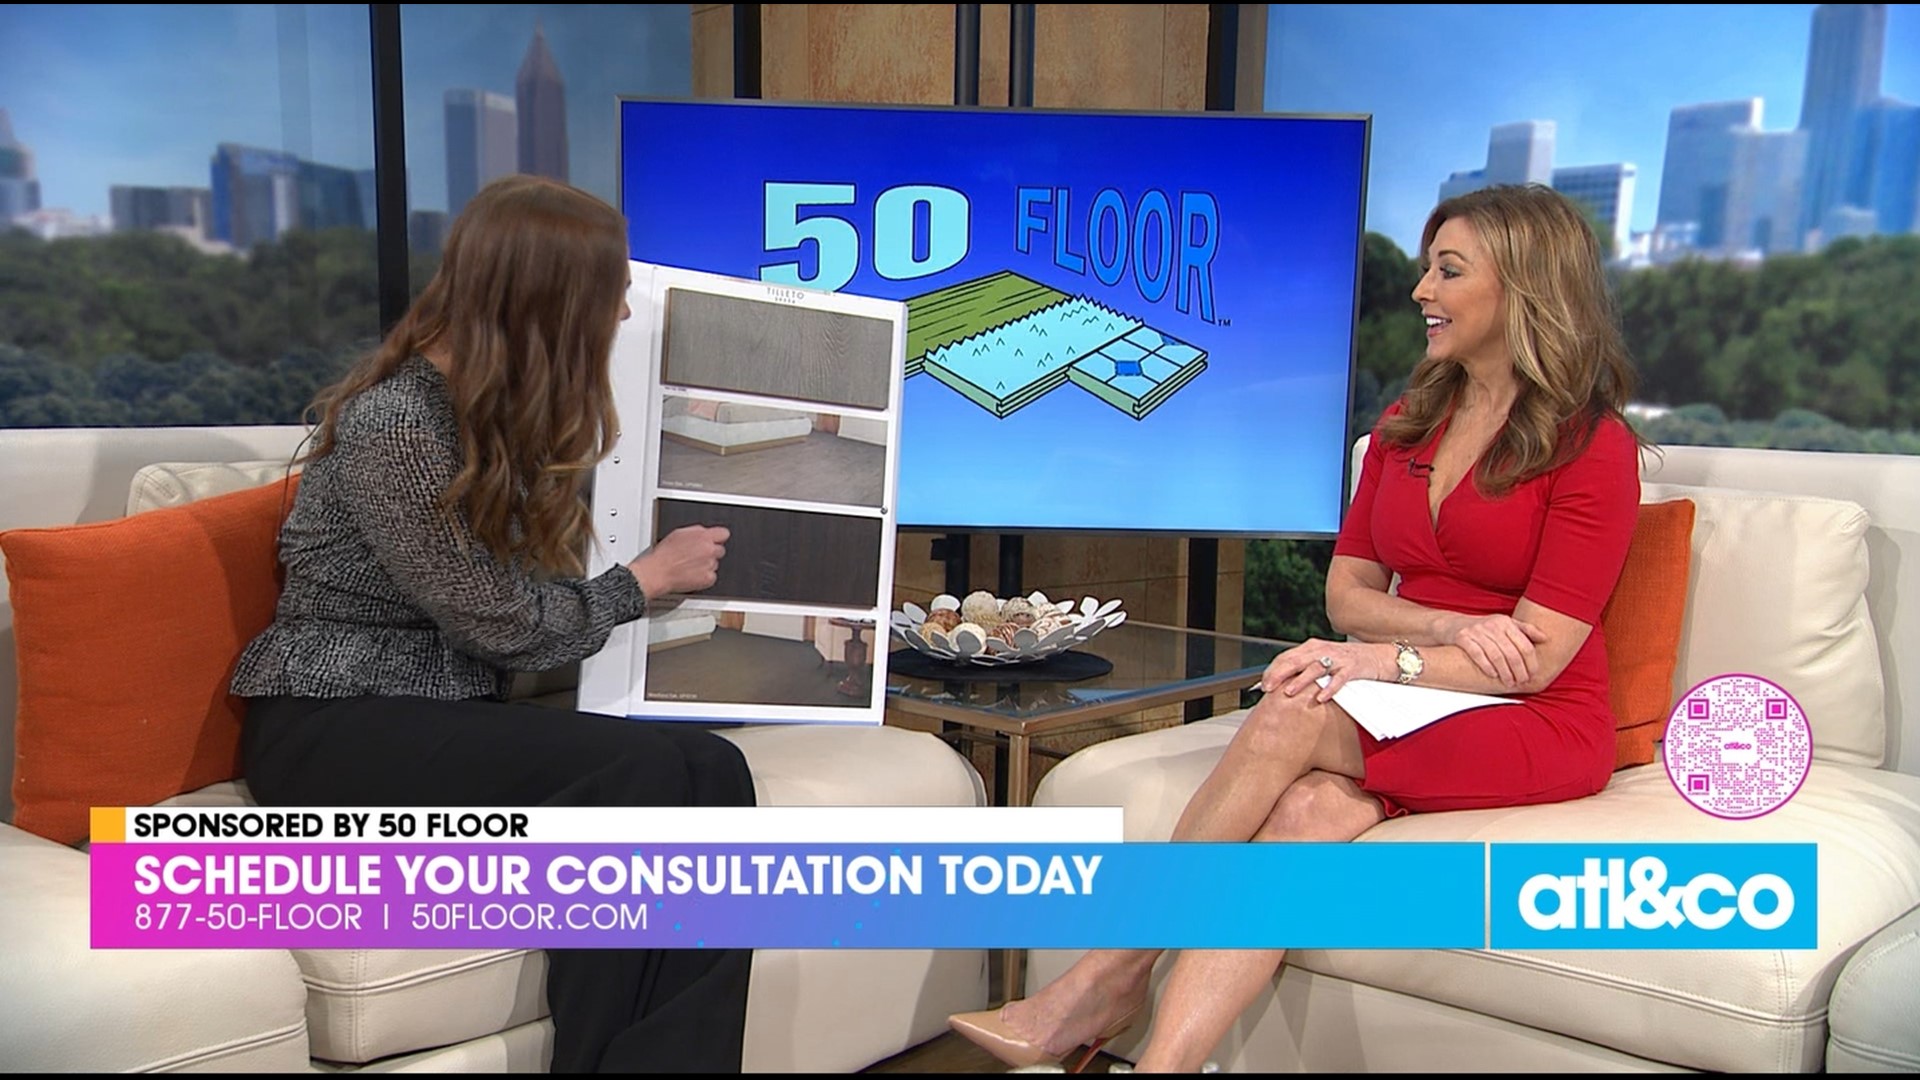 Schedule your consultation with 50 Floor today and get free installation.